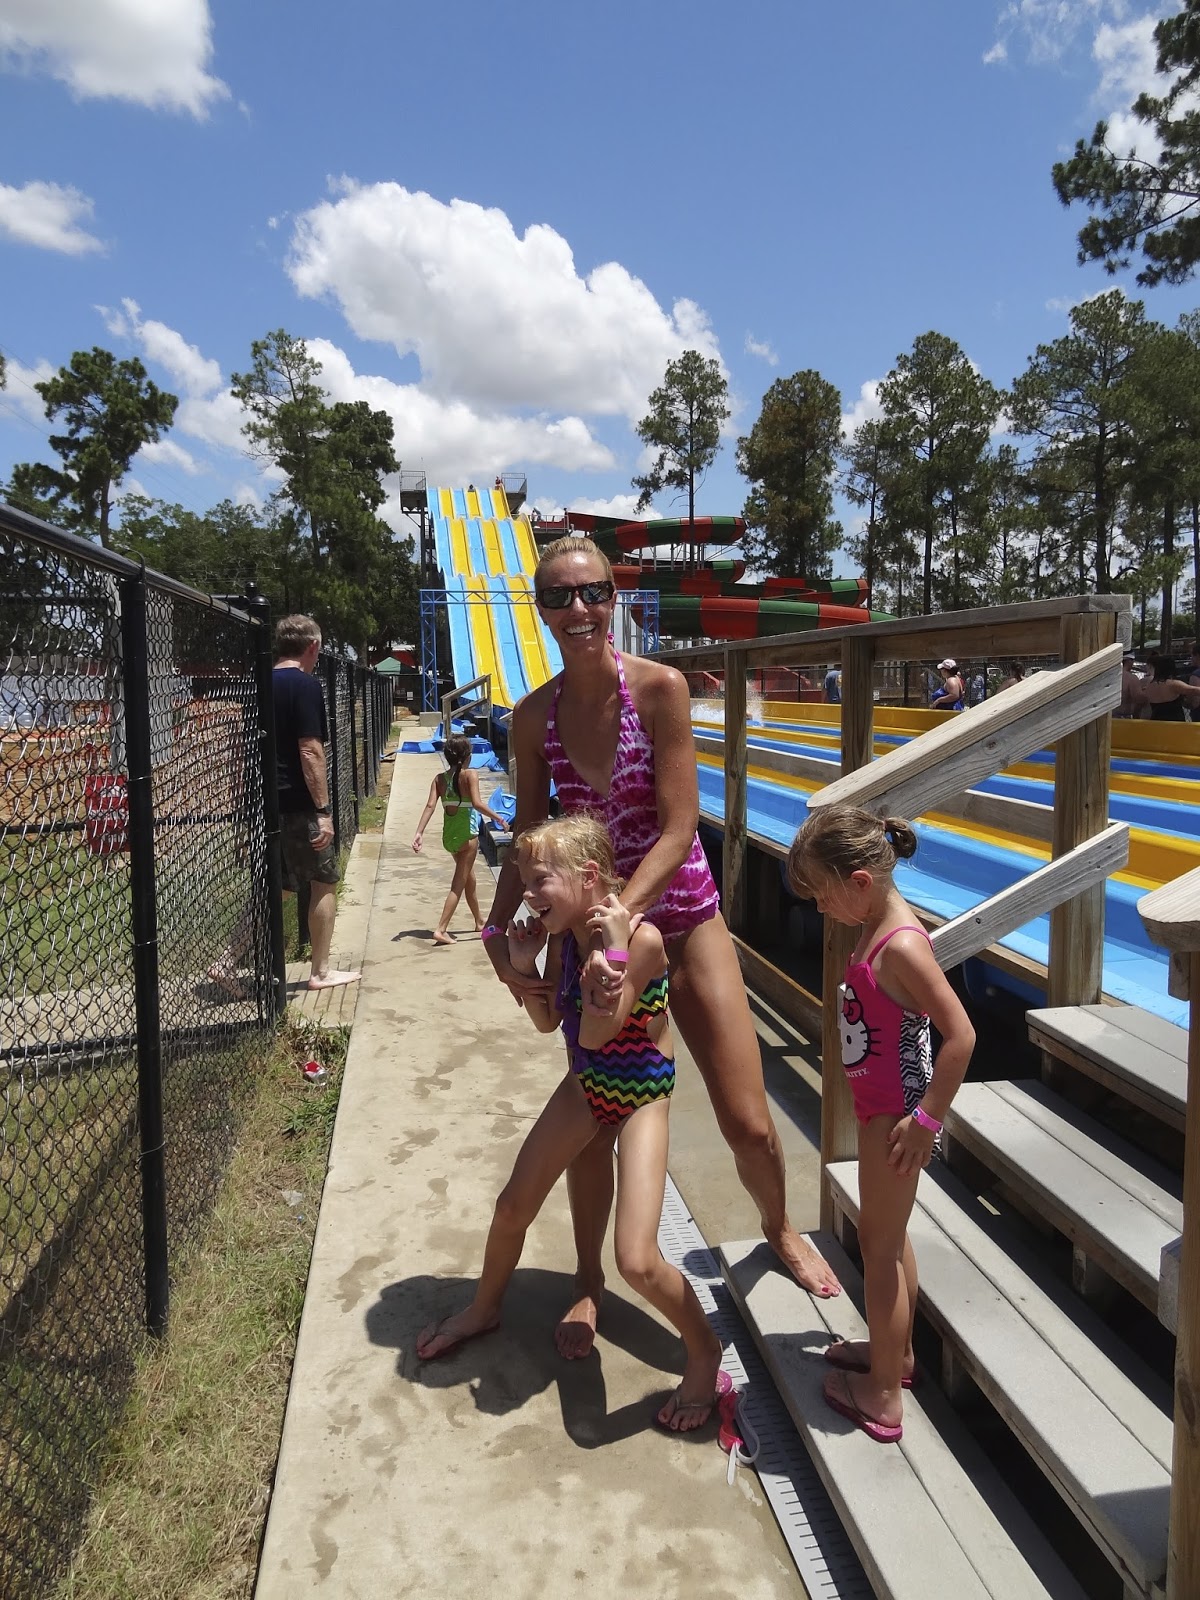 Get Outa Town: YOGI BEAR'S JELLYSTONE PARK - FEATURING the WATERPARK